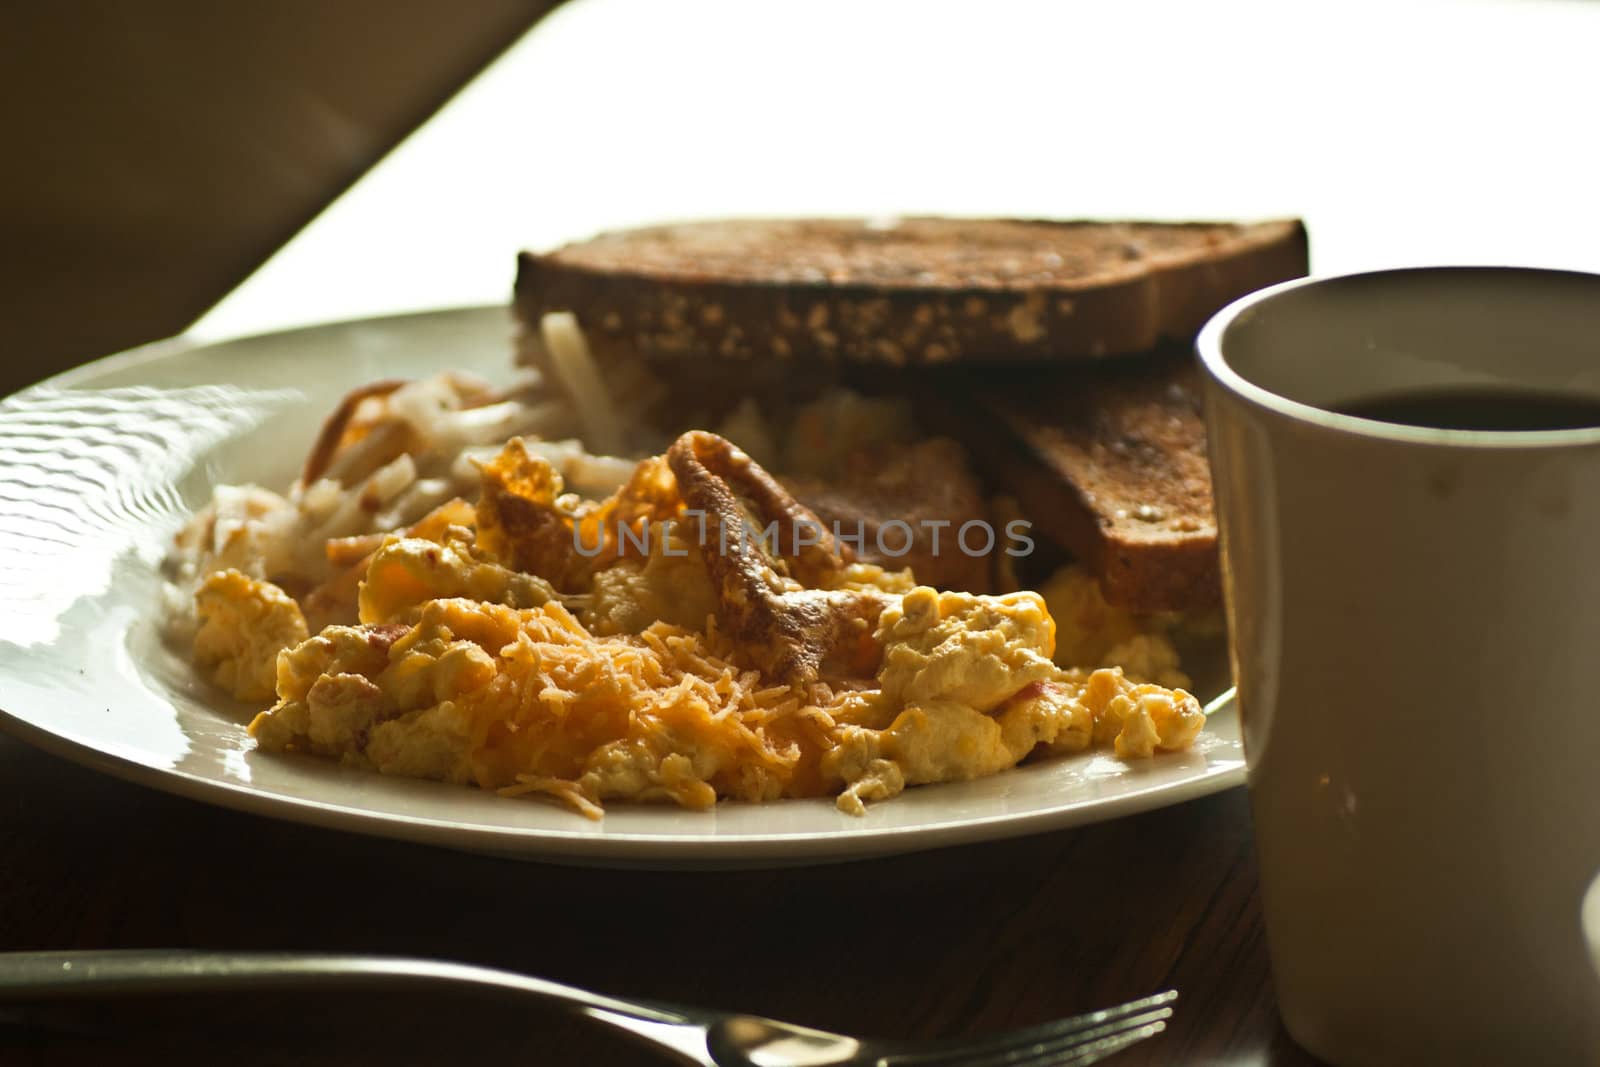 A full view of a plate of breakfast food ready to eat with coffee cup in forground.